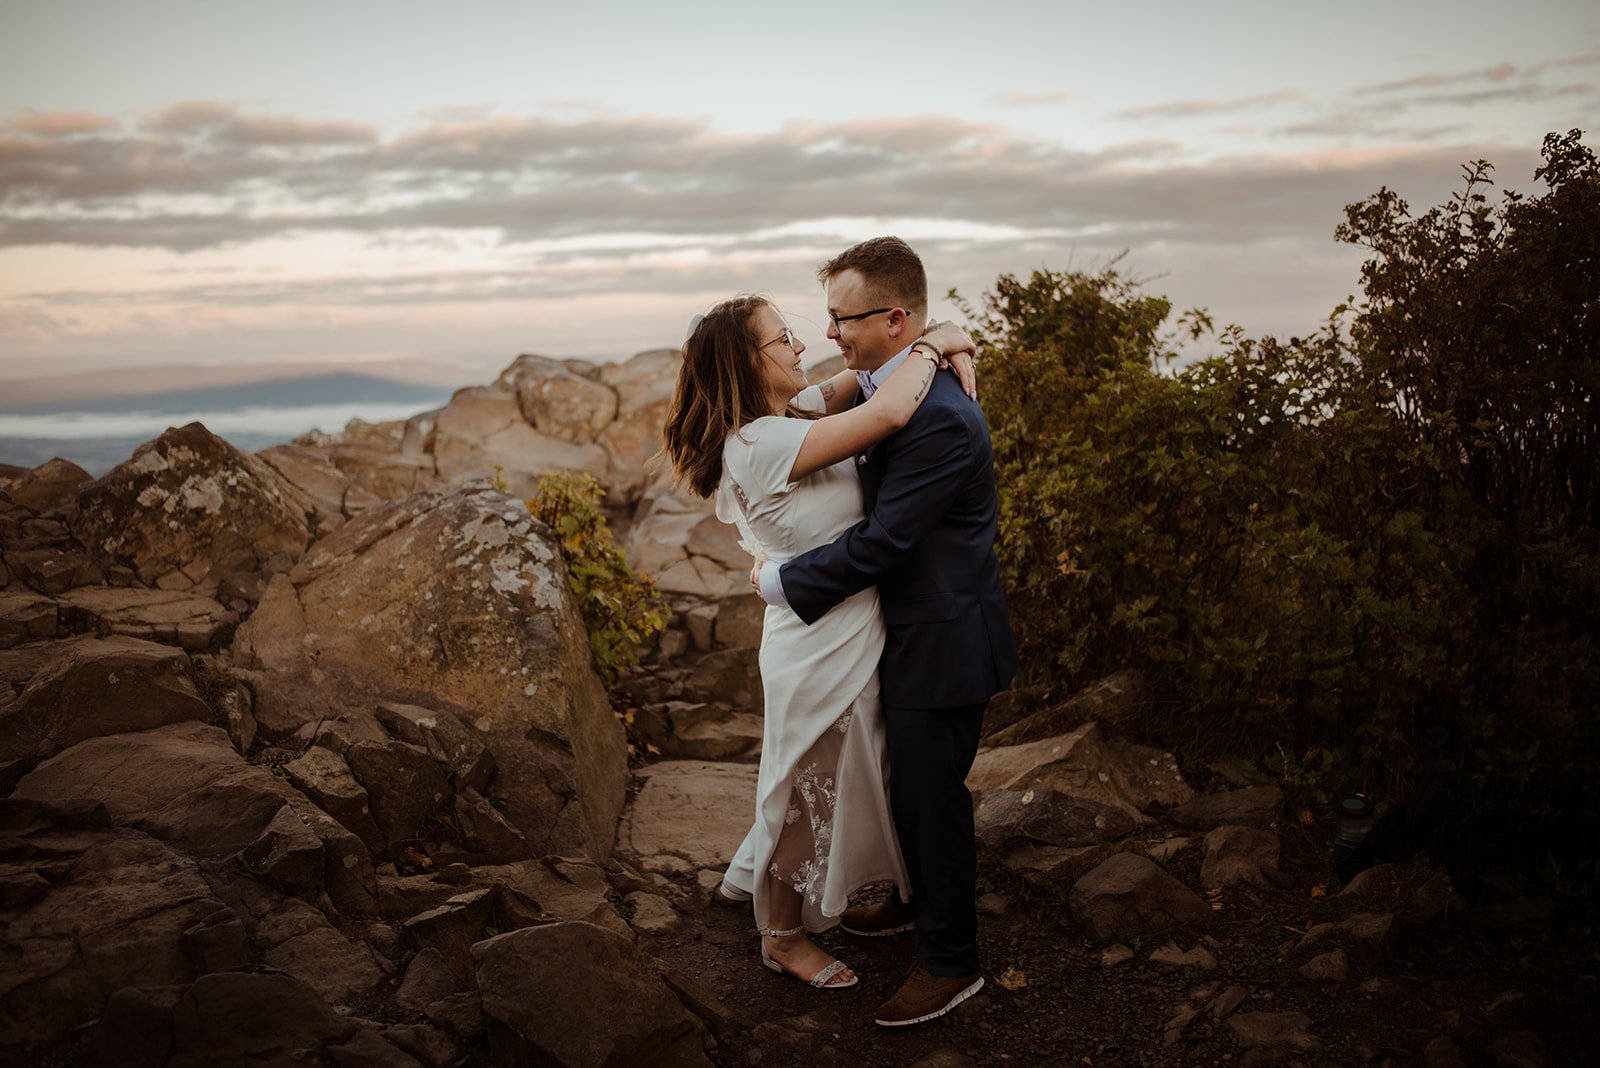 Shenandoah National Park Hiking Elopement with Guests - White Sails Creative_50.jpg